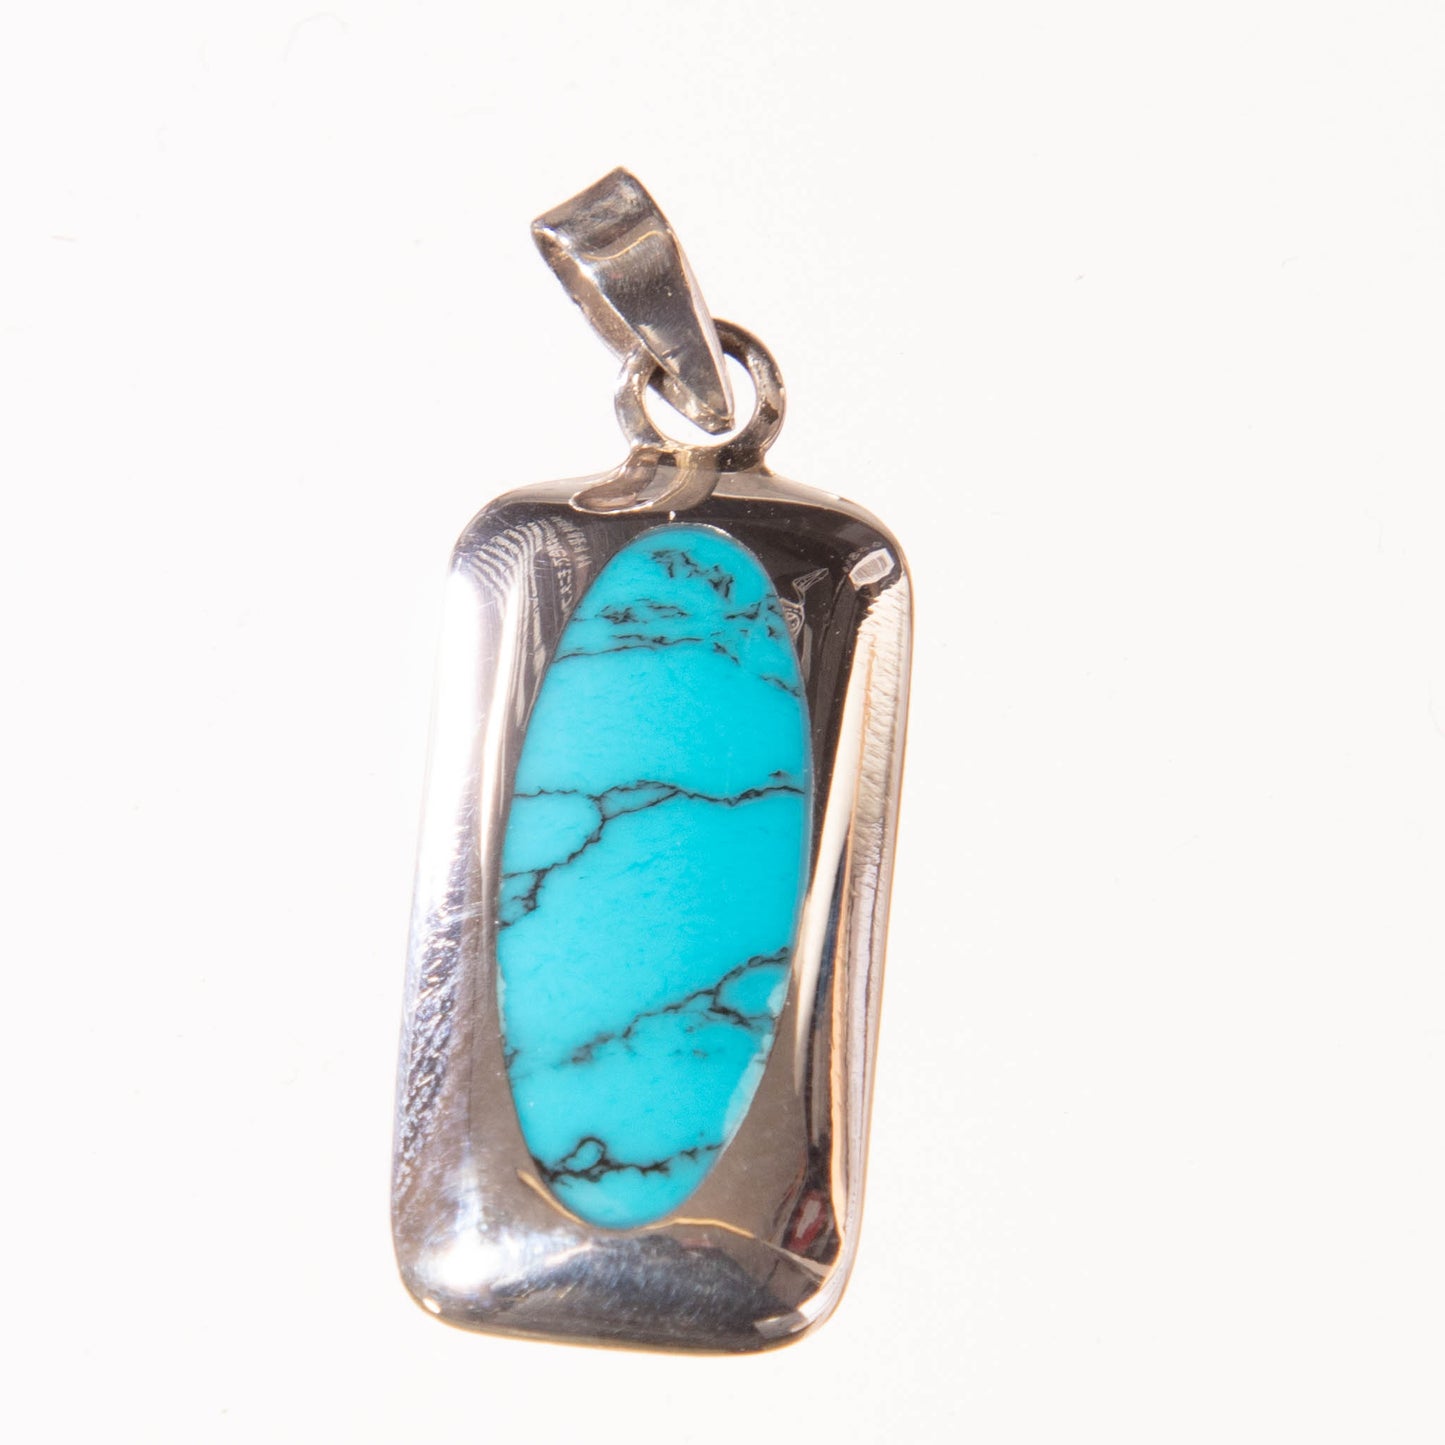 Pendant, Featured Turquoise set in Sterling Silver